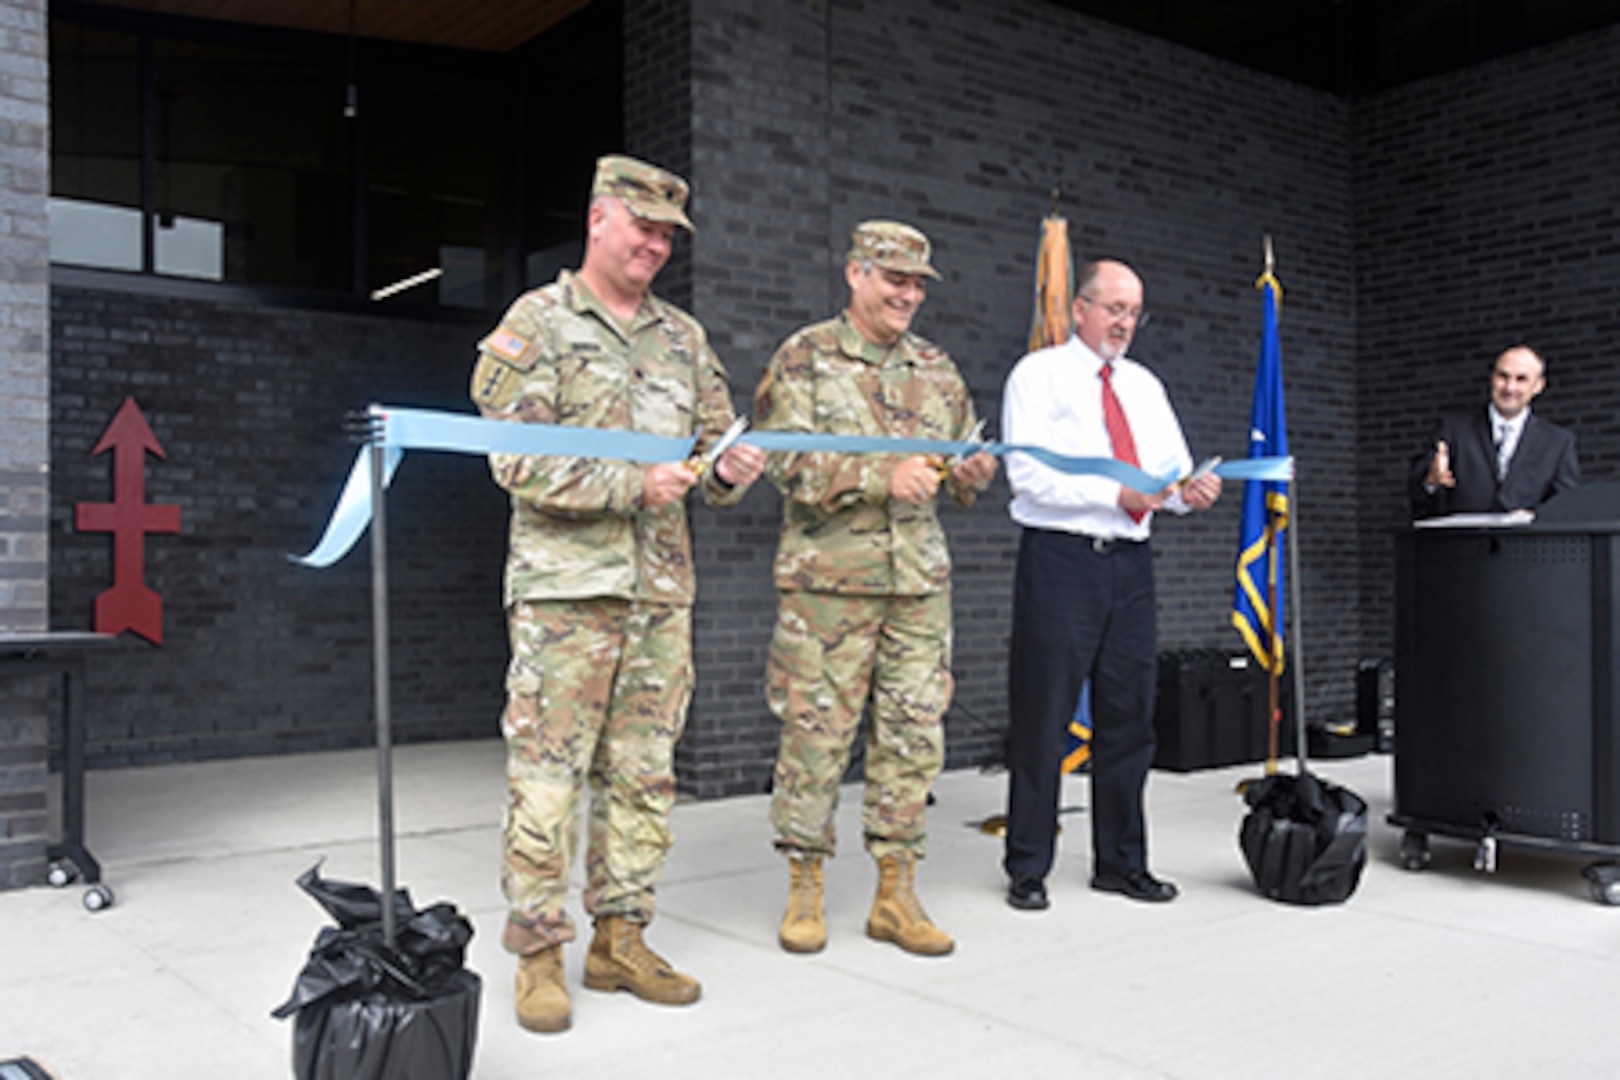 Lt. Col. Bill Benson, commander of the Wisconsin Army National Guard’s 2nd Battalion, 127th Infantry Regiment, joins Maj. Gen. Paul Knapp, Wisconsin’s adjutant general, and Dan Durig, a Wisconsin Department of Military Affairs civil engineer, in cutting a ribbon to signify the grand opening of the Wisconsin Army National Guard armory in Appleton, Wis., Sept. 28.